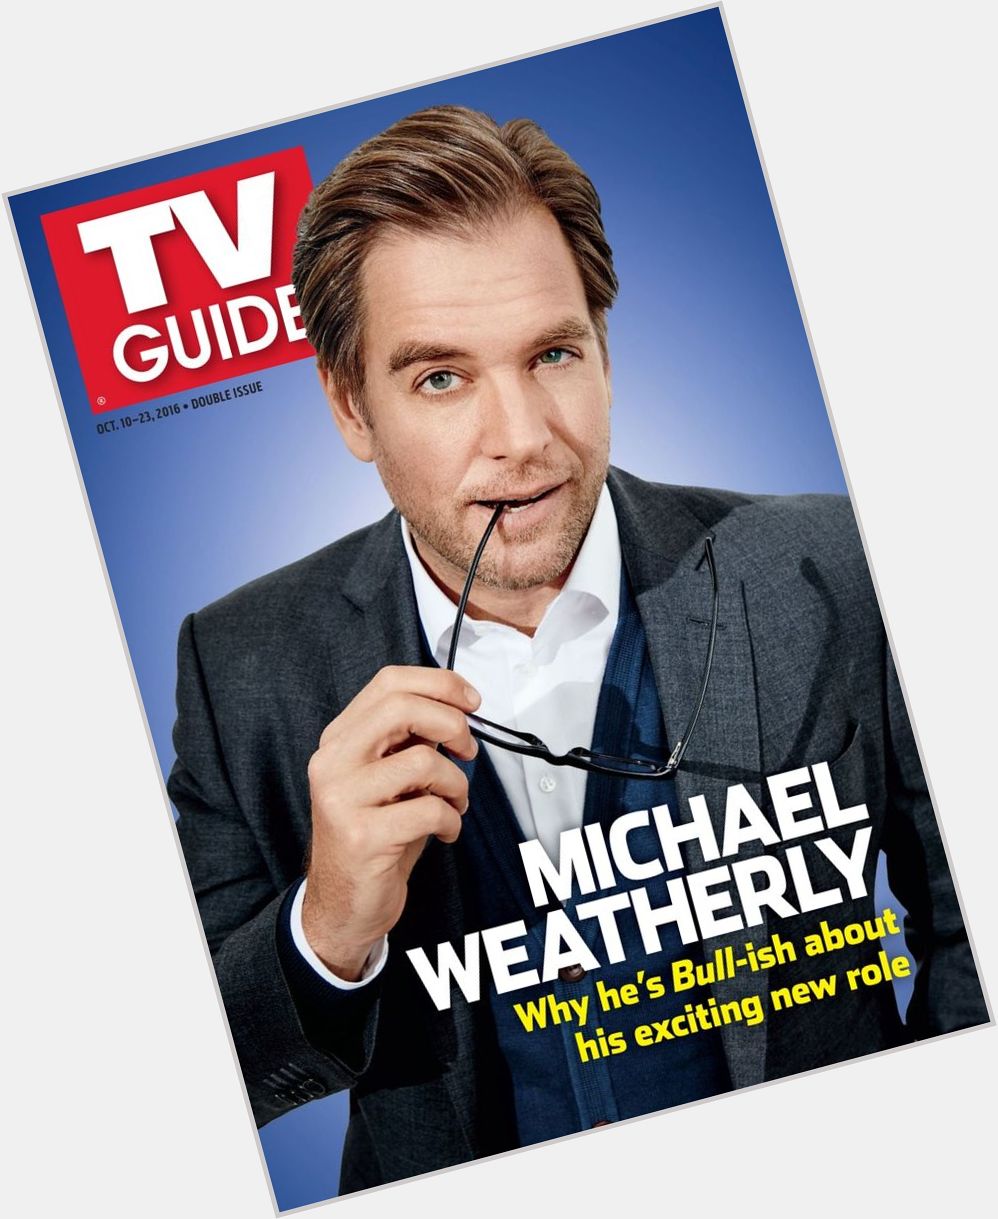 Happy Birthday to Michael Weatherly, who turns 49 today! 